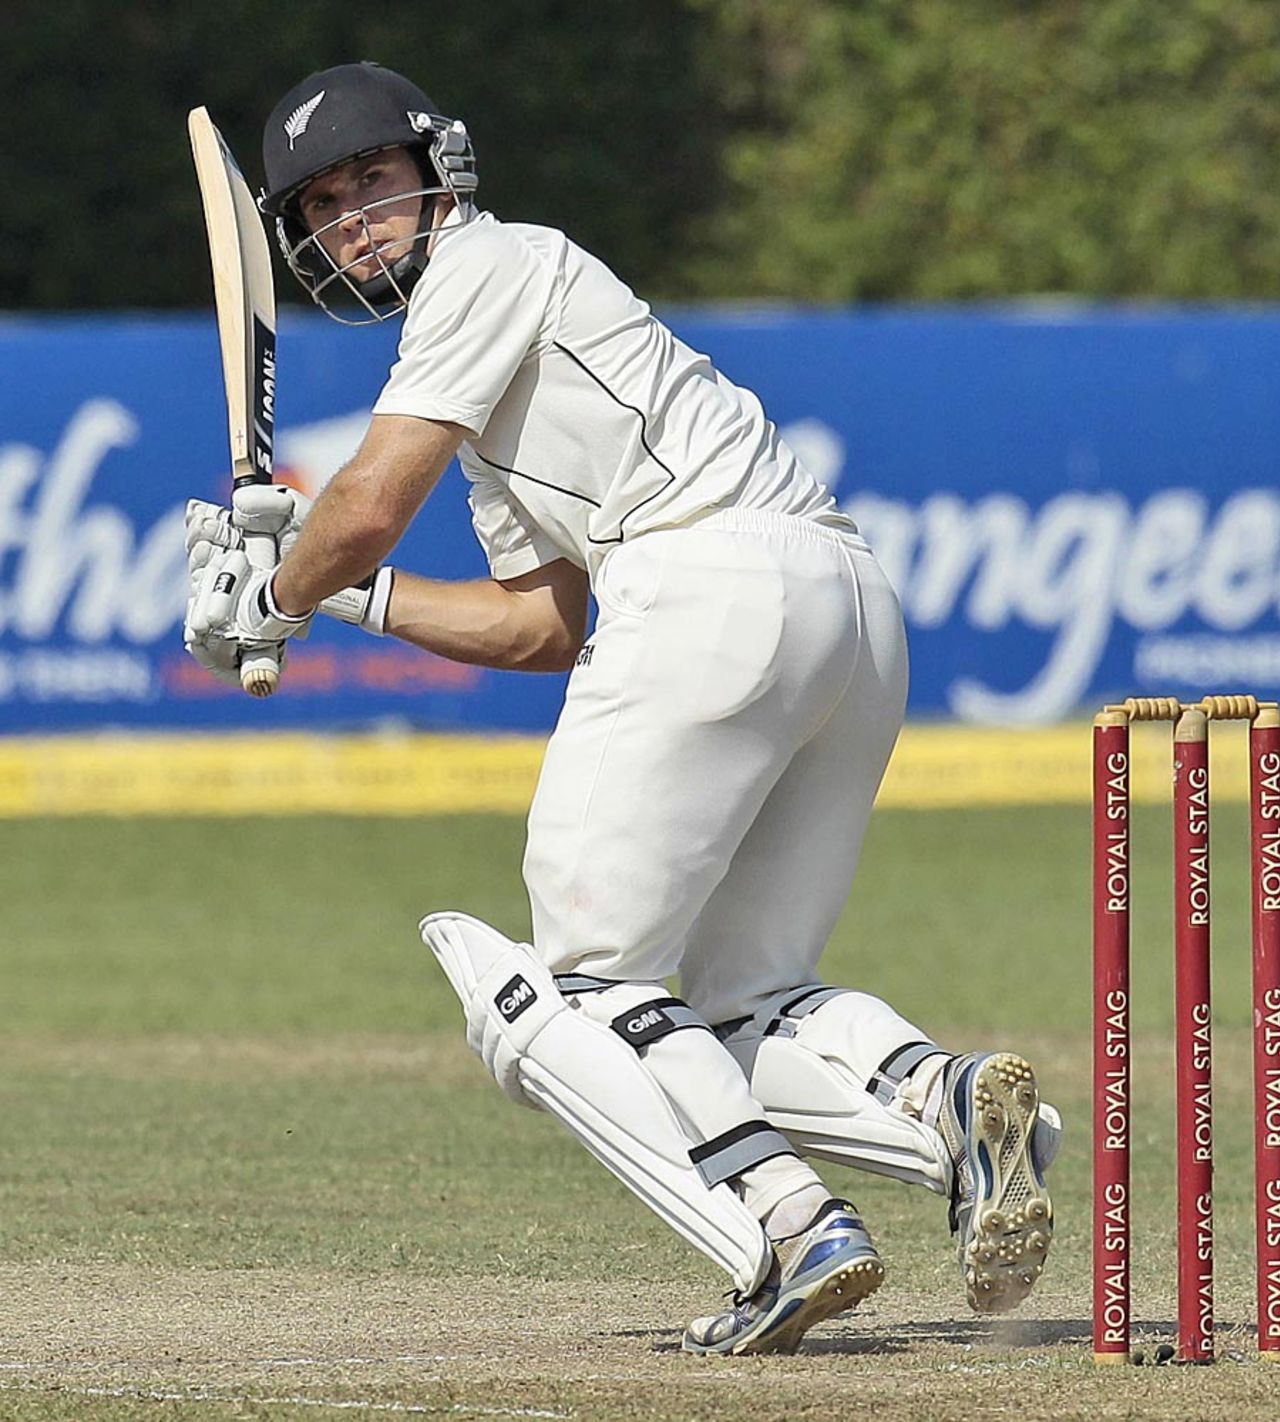 Todd Astle scored 35, and shared a 97-run stand with Ross Taylor, Sri Lanka v New Zealand, 2nd Test, Colombo, 4th day, November 28, 2012